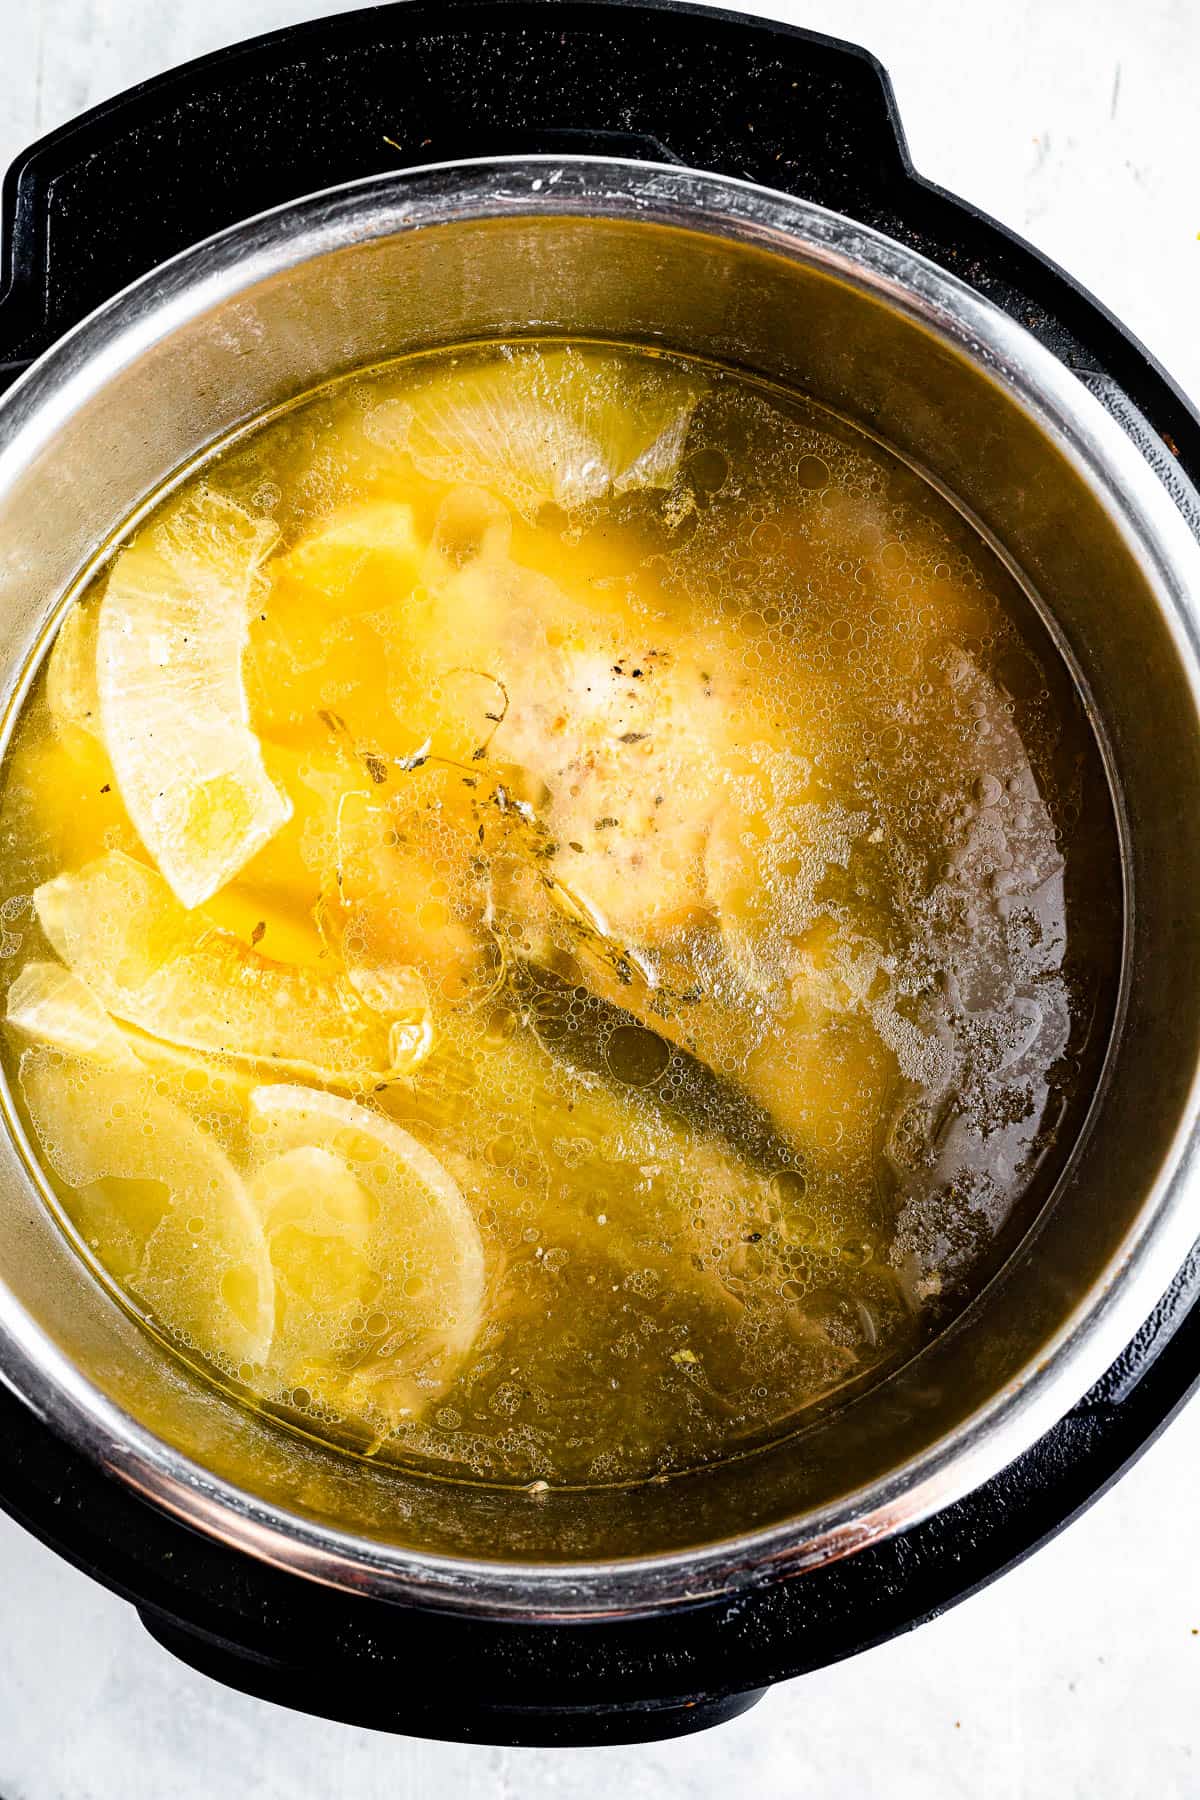 An overhead shot of the interior of an Instant Pot, filled with chicken broth, a cooked chicken, and scraps of vegetables.